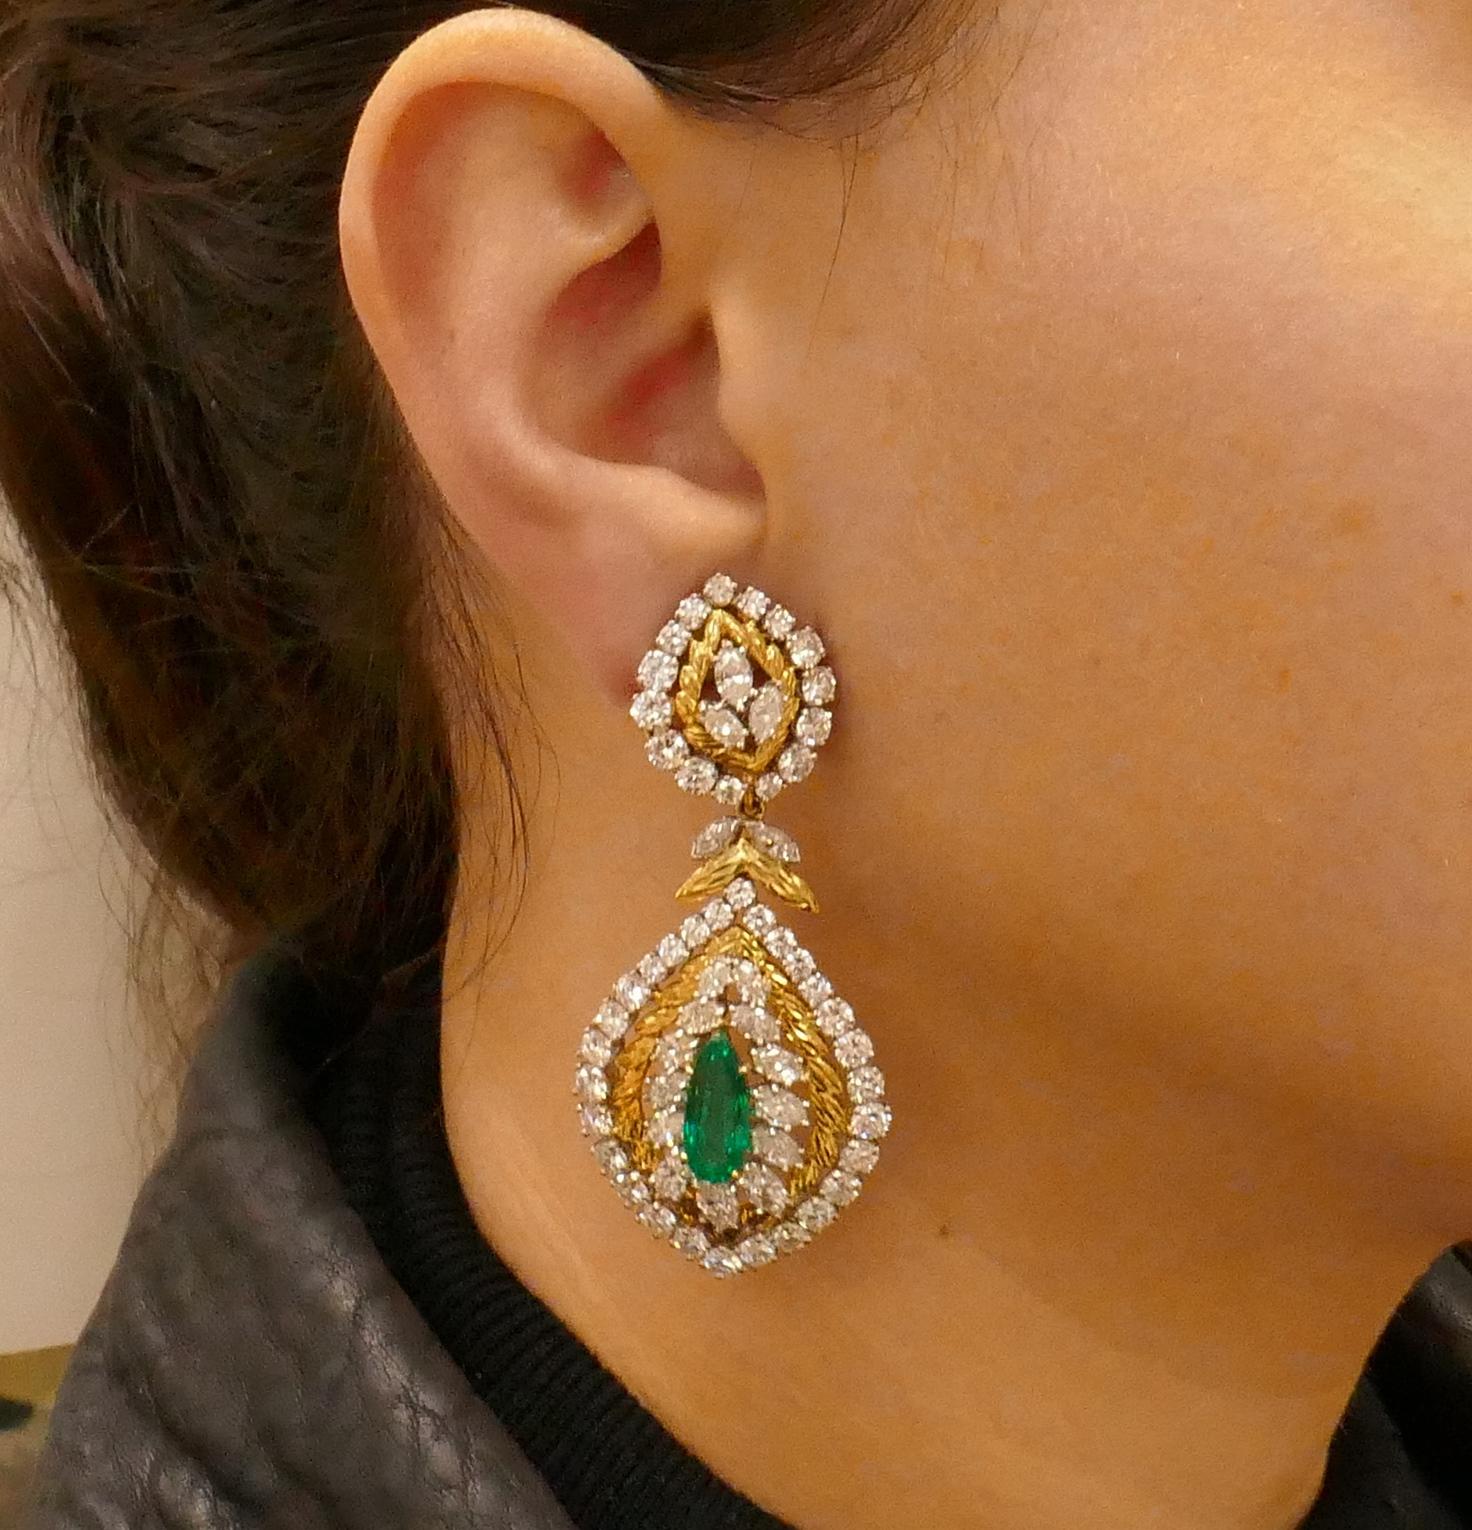 Stunning Day & Night Cross River earrings. Feature elongated pear cut emeralds surrounded with diamonds set in 18 karat yellow gold and platinum. 
The emeralds are approximately 3.05-carat and 2.75-carat. The diamonds are round brilliant and